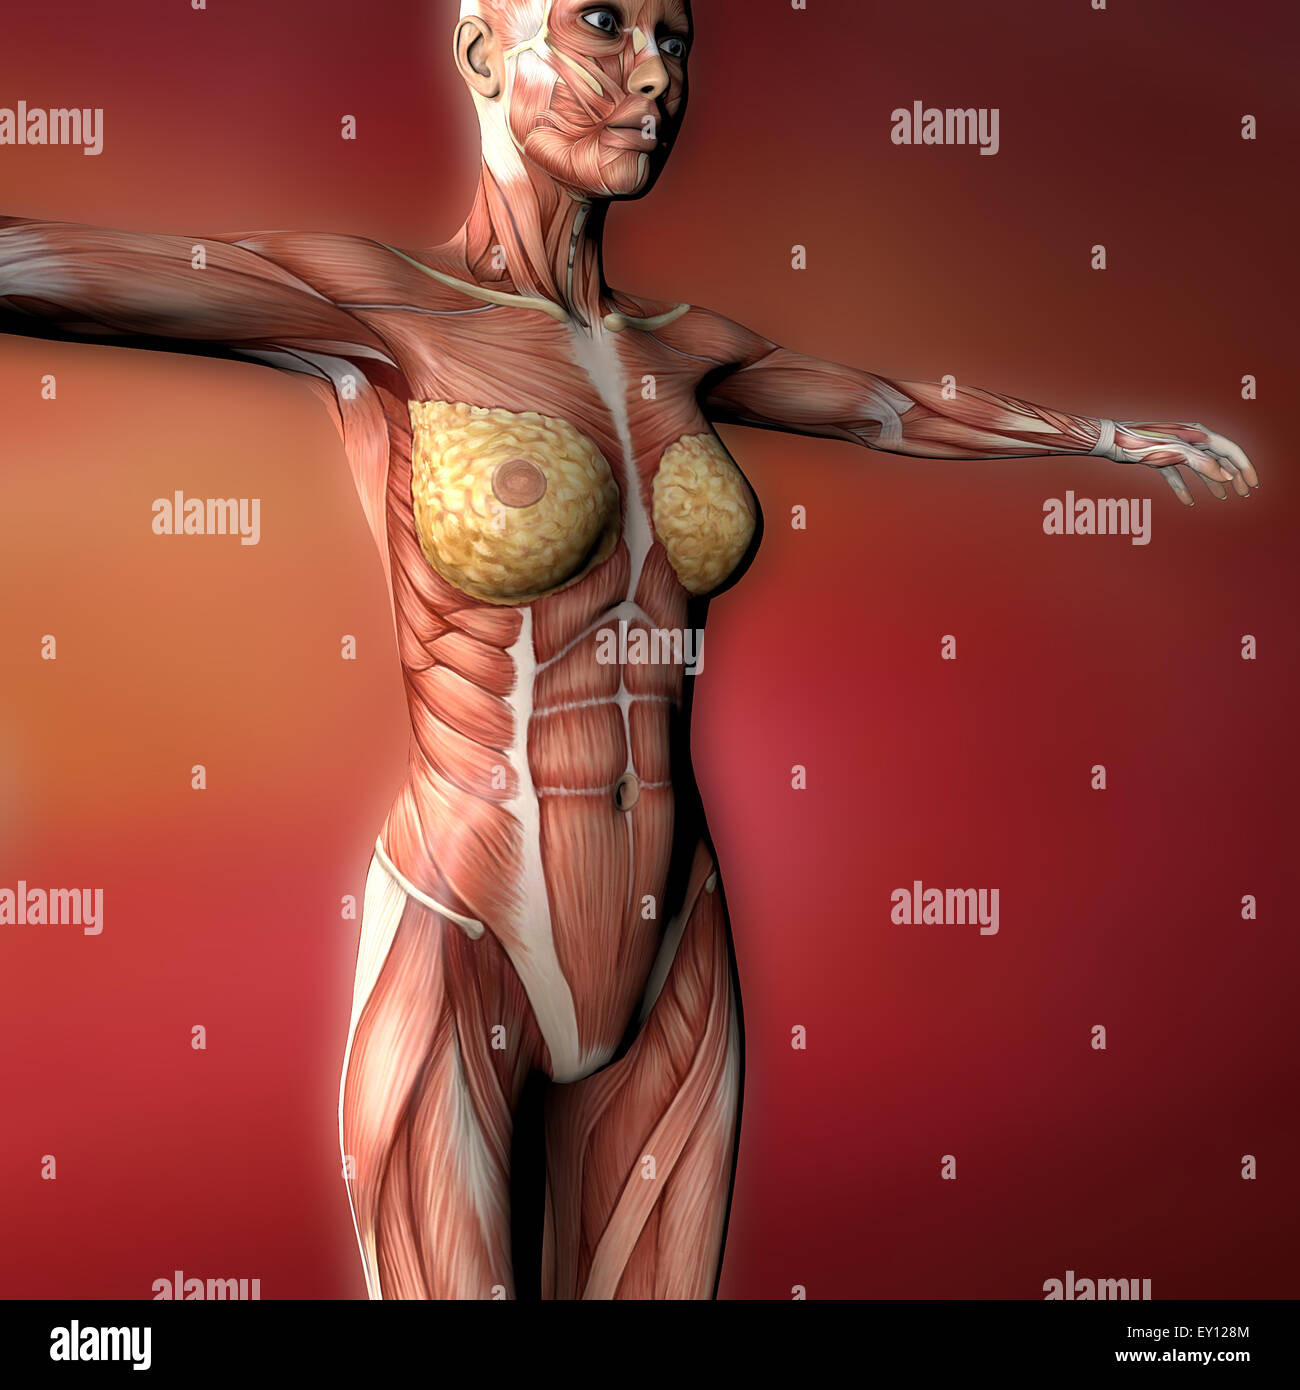 21,187 Realistic Woman Body Images, Stock Photos, 3D objects